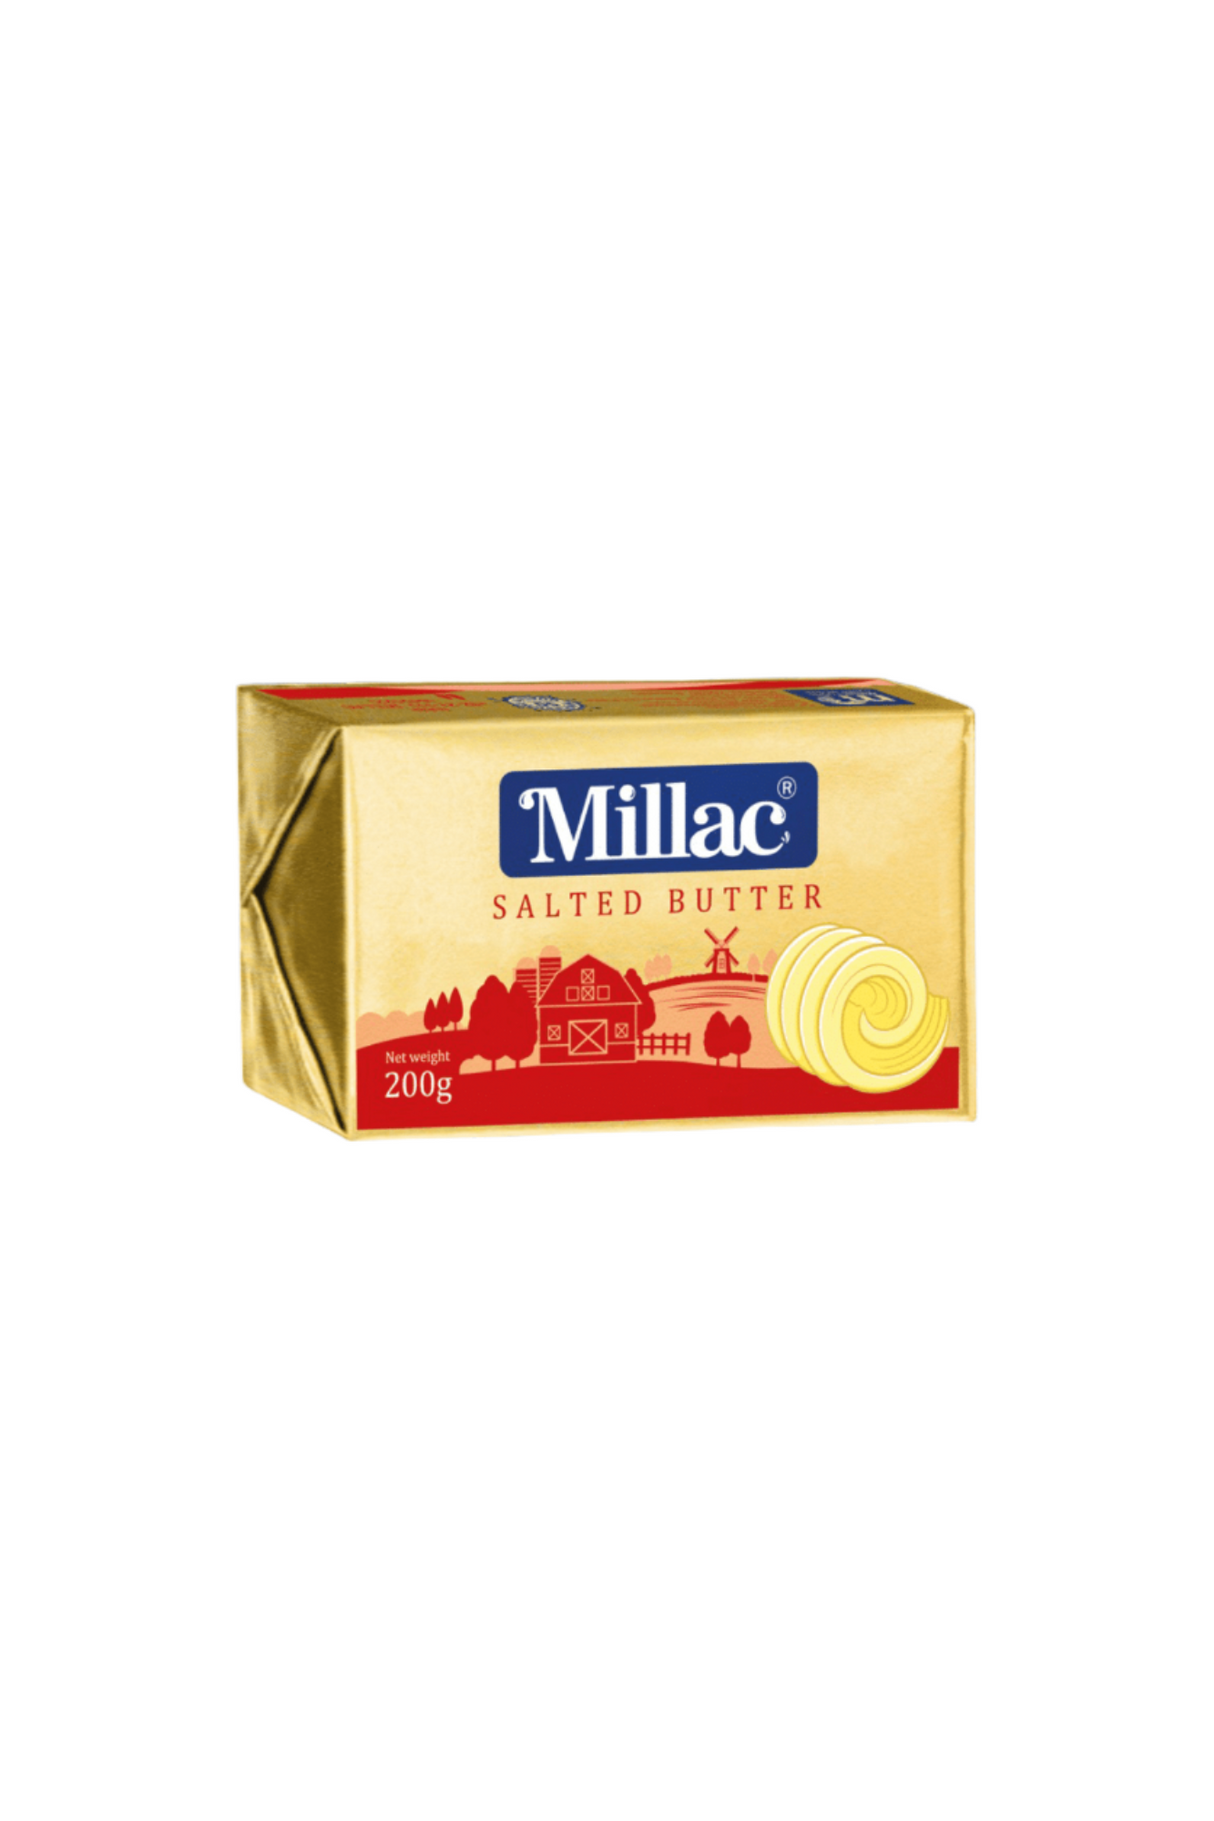 millac butter salted 200g